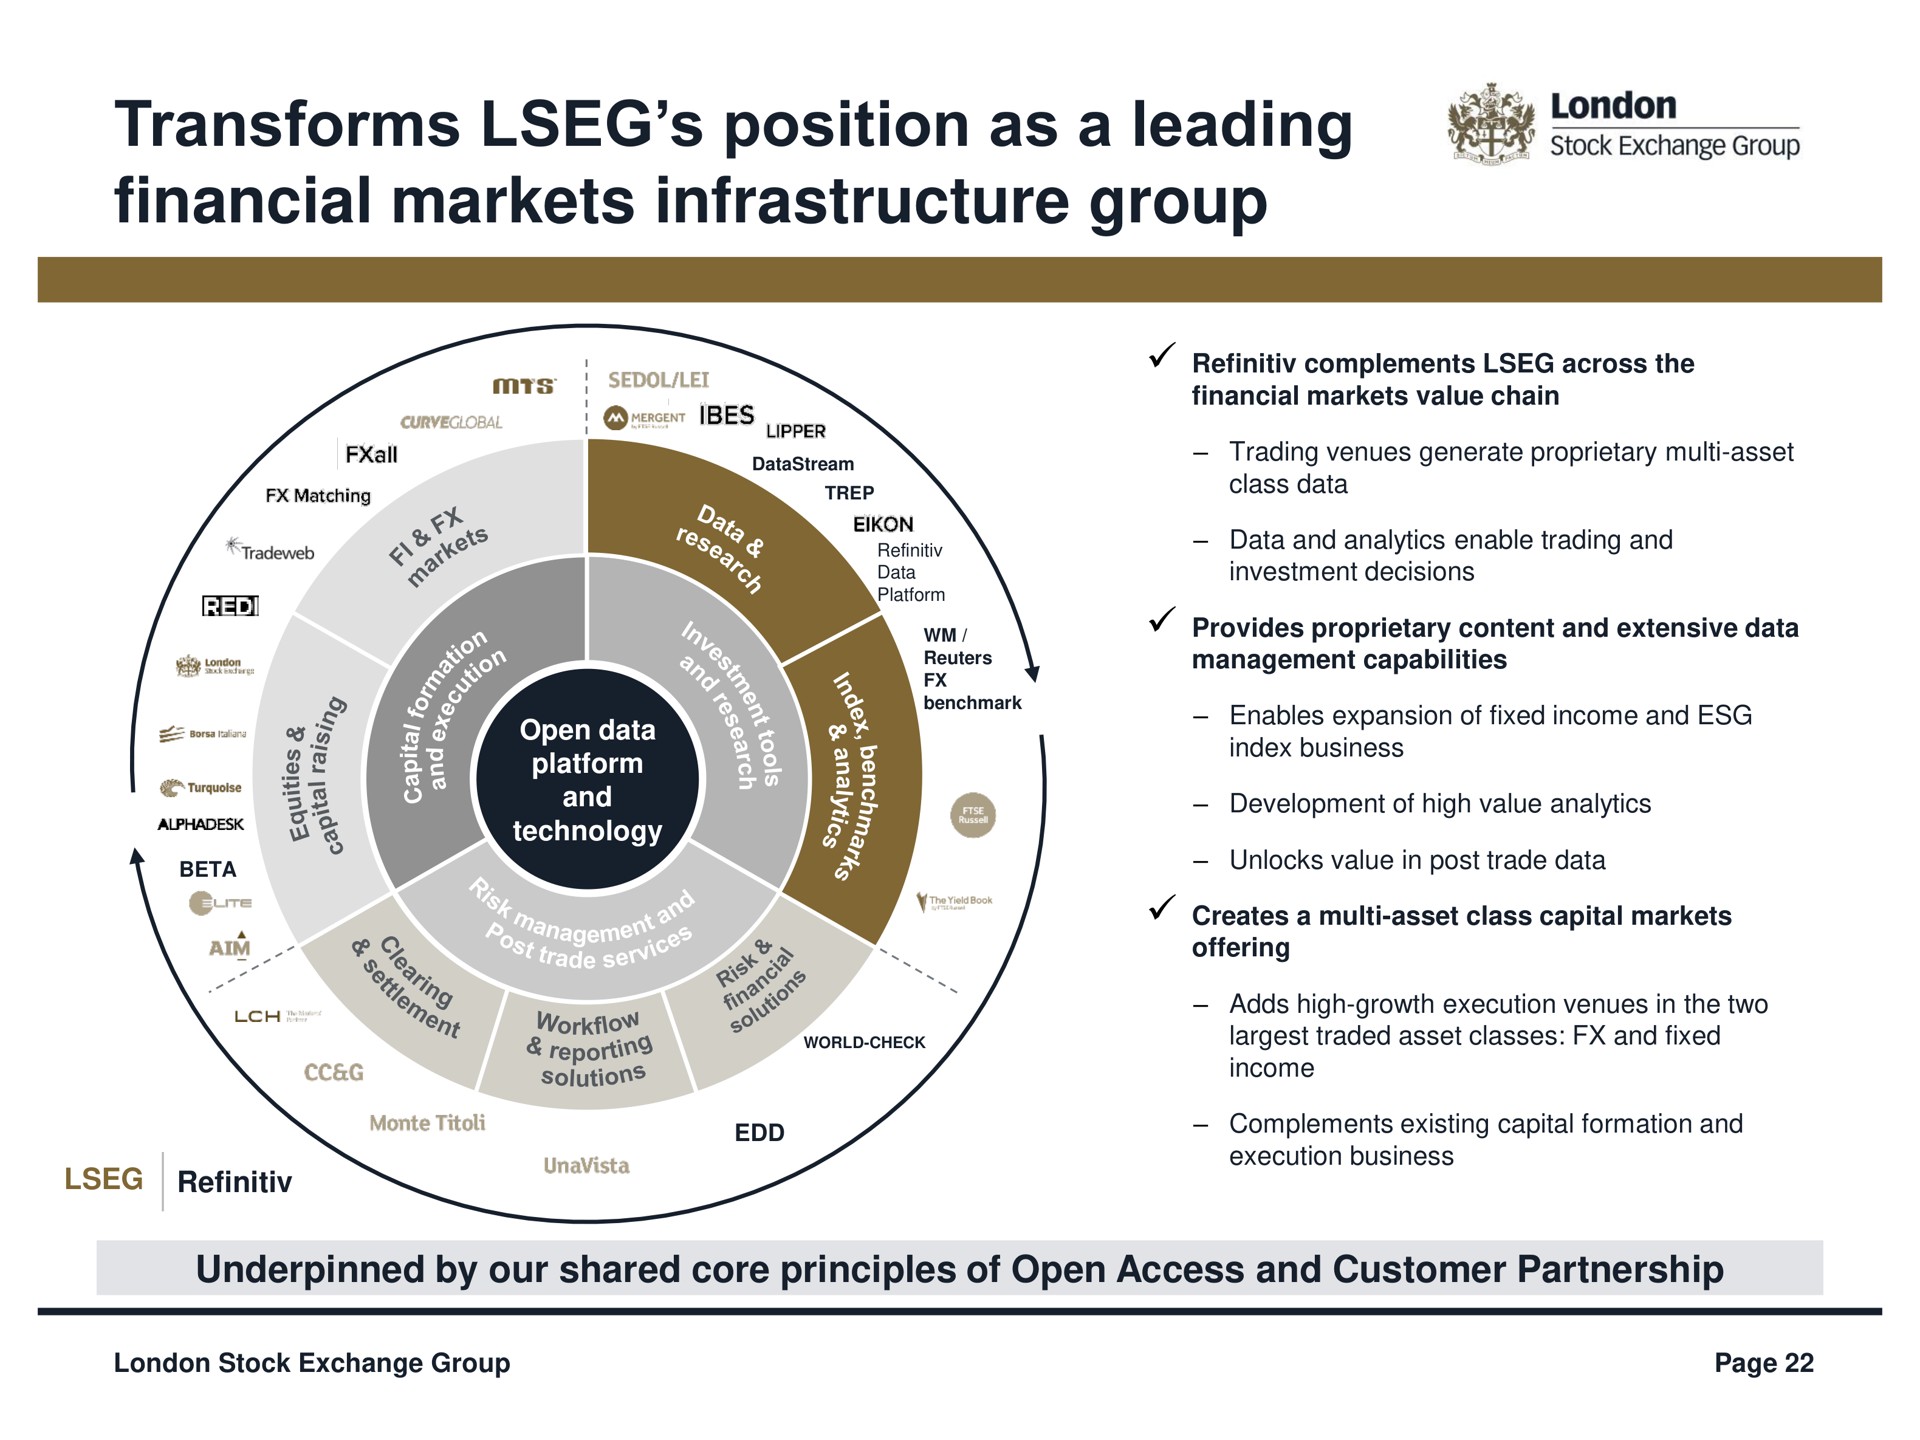 transforms position as a leading financial markets infrastructure group | LSE